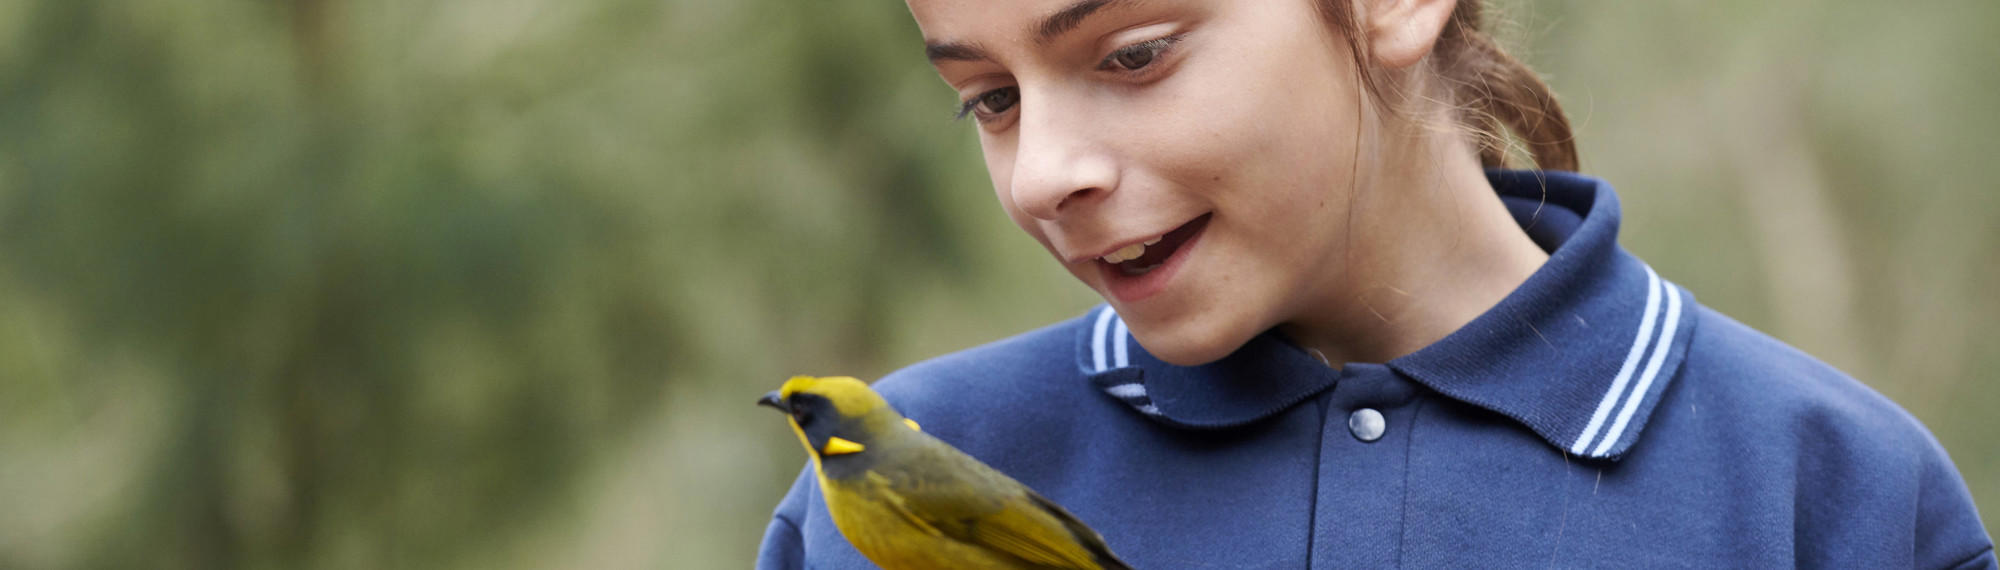 Student In Uniform Looks At Helmeted Honeyeater at Healesville Sanctuary